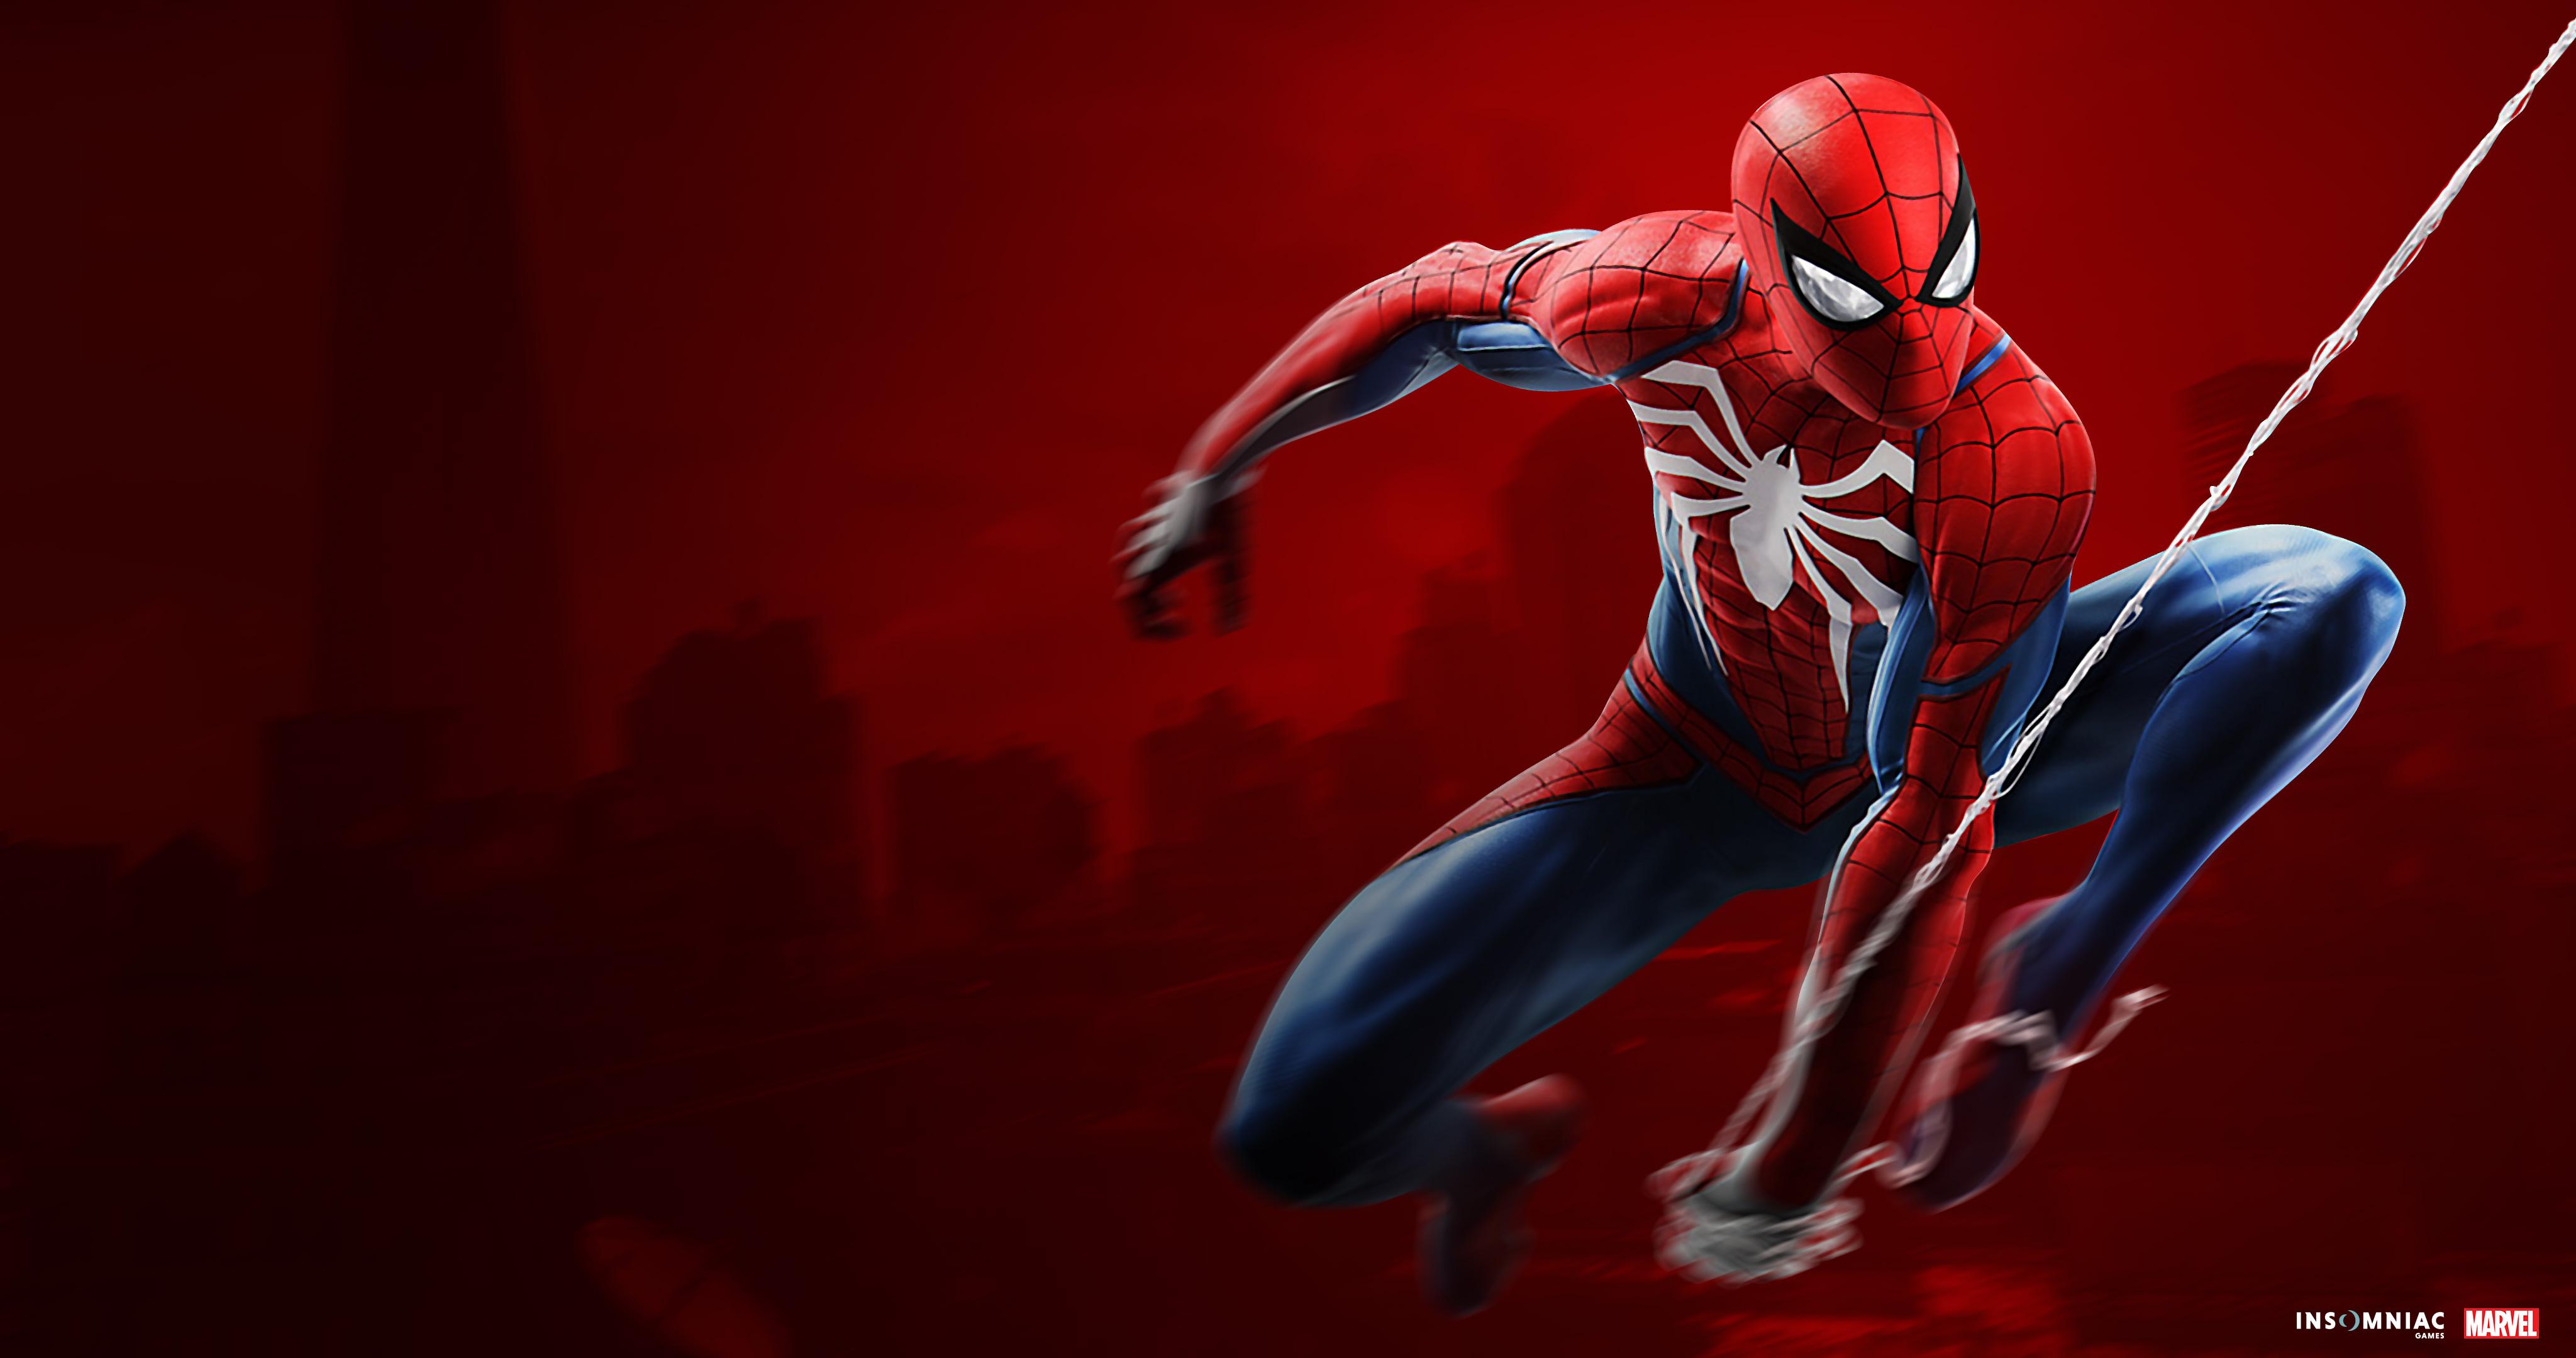 4096 x 2160 · jpeg - Spiderman Ps4 4k, HD Games, 4k Wallpapers, Images, Backgrounds, Photos ...